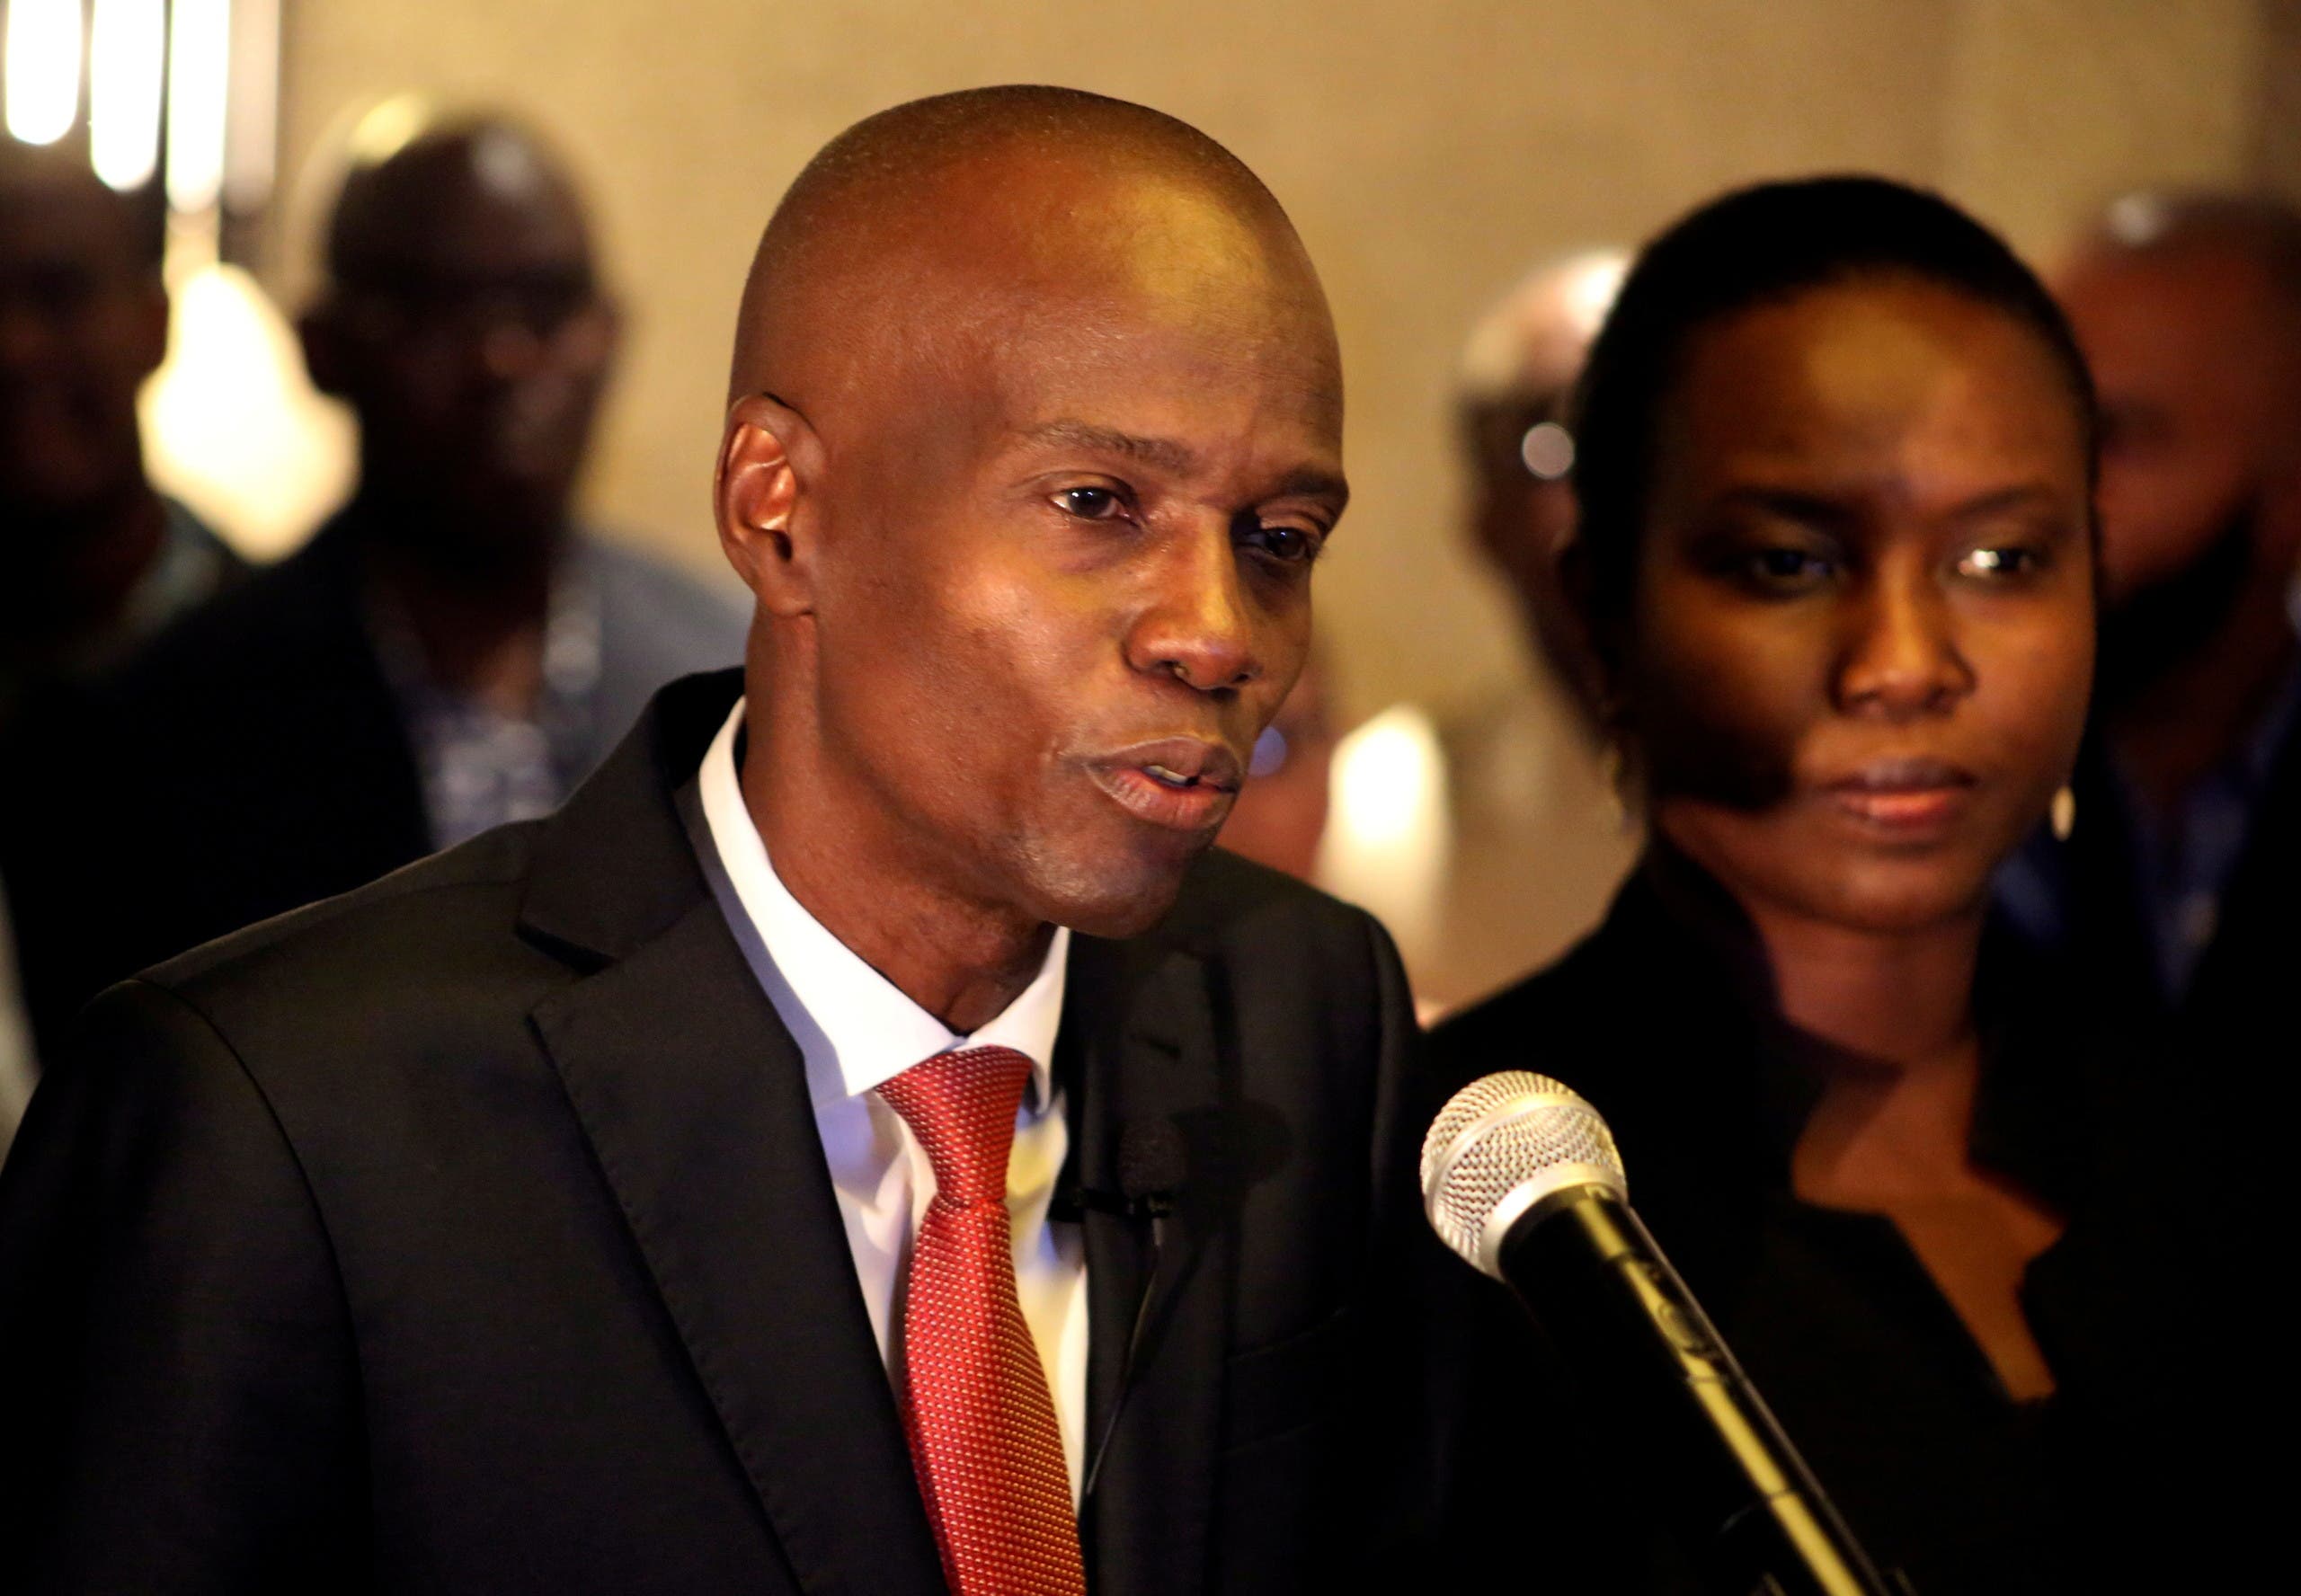 Jovenel Moise addresses the media next to his wife Martine after winning the 2016 presidential election, in Port-au-Prince, Haiti. Picture taken November 28, 2016. (File photo: Reuters)